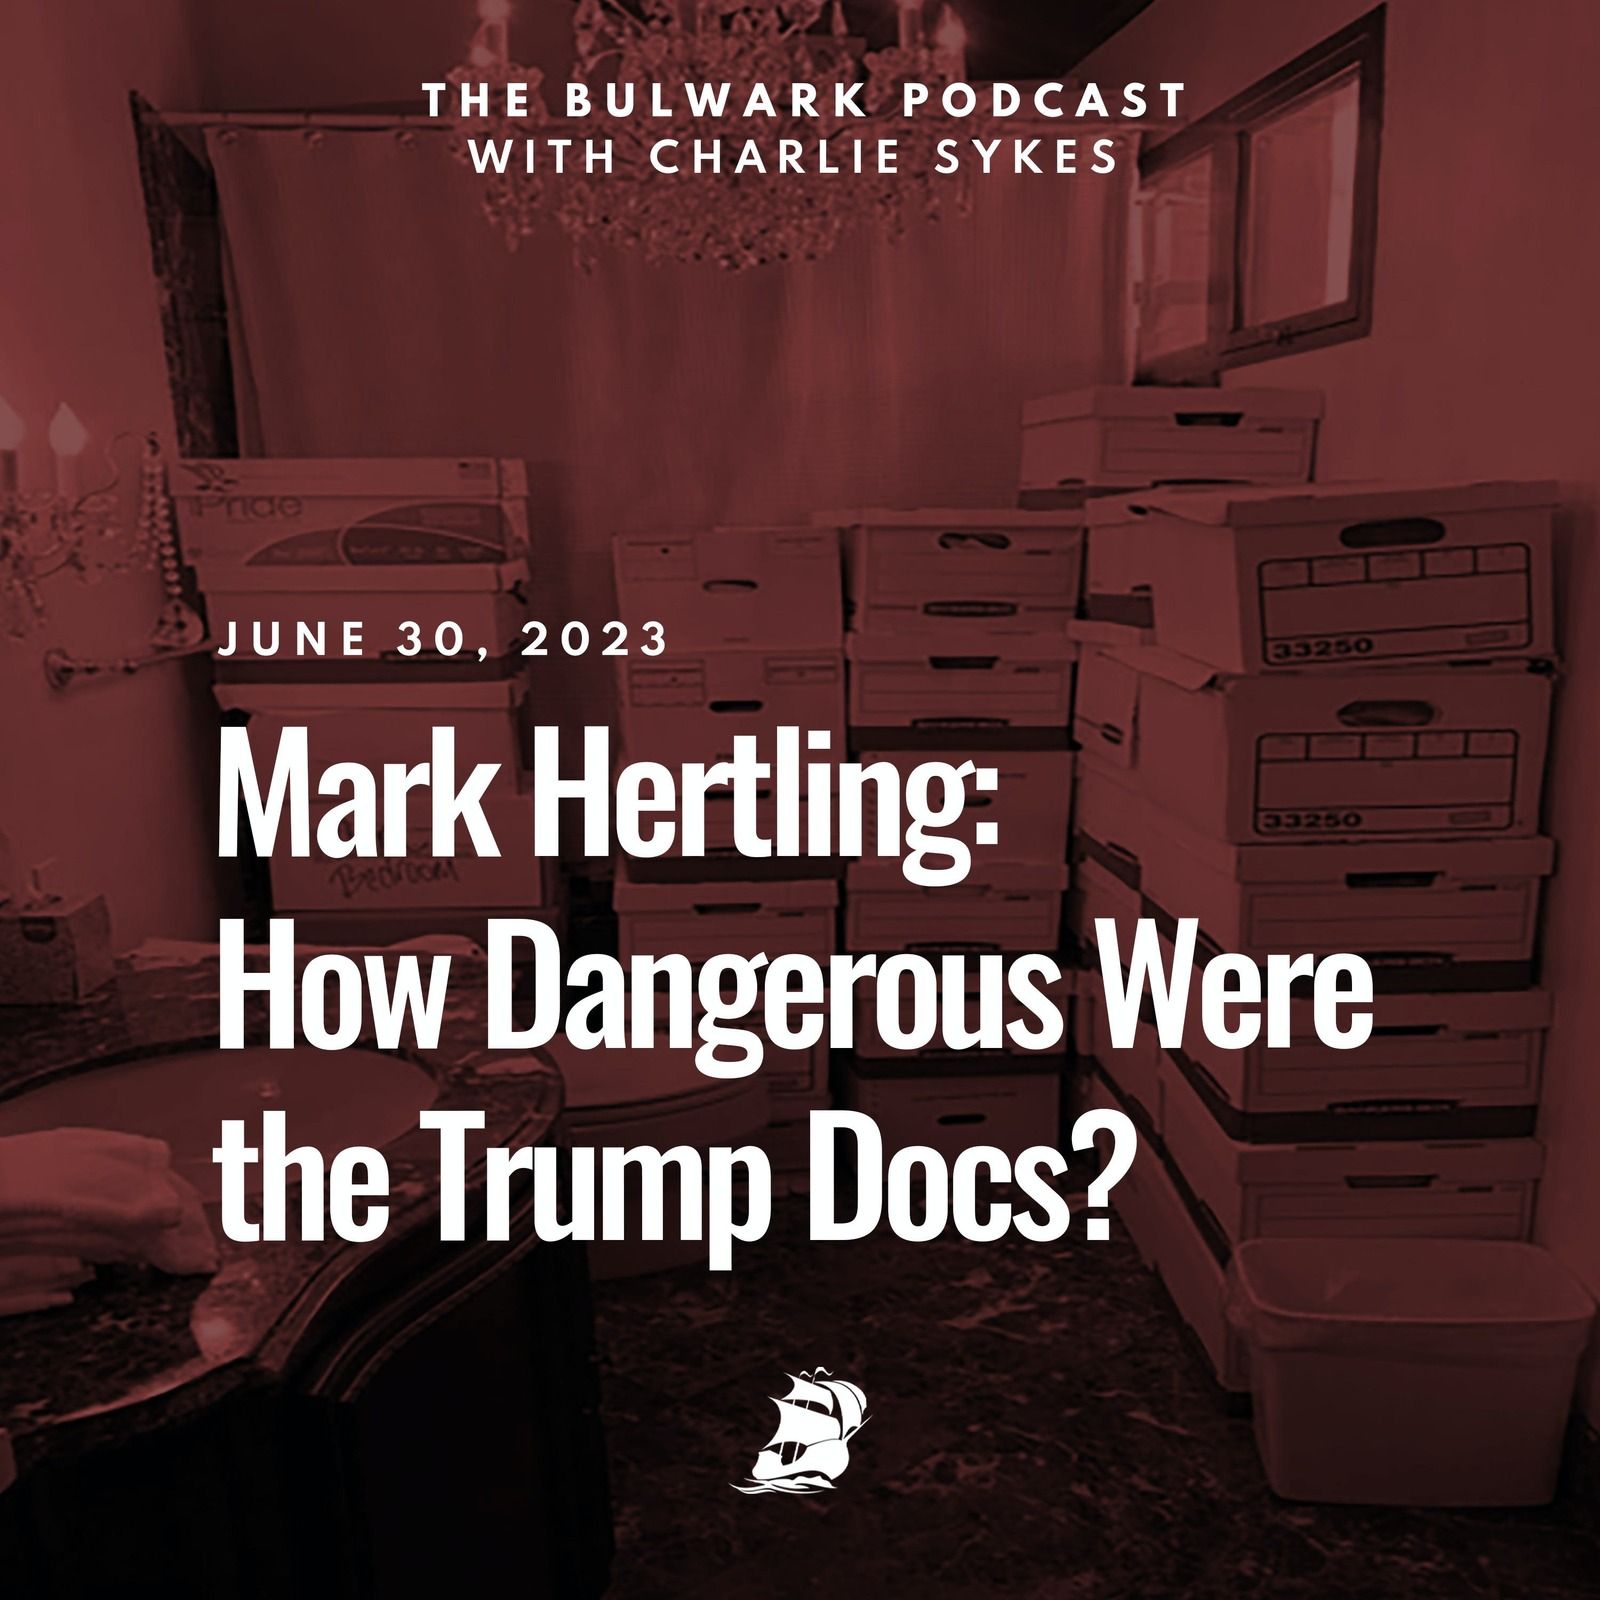 Mark Hertling: How Dangerous Were the Trump Docs? by The Bulwark Podcast